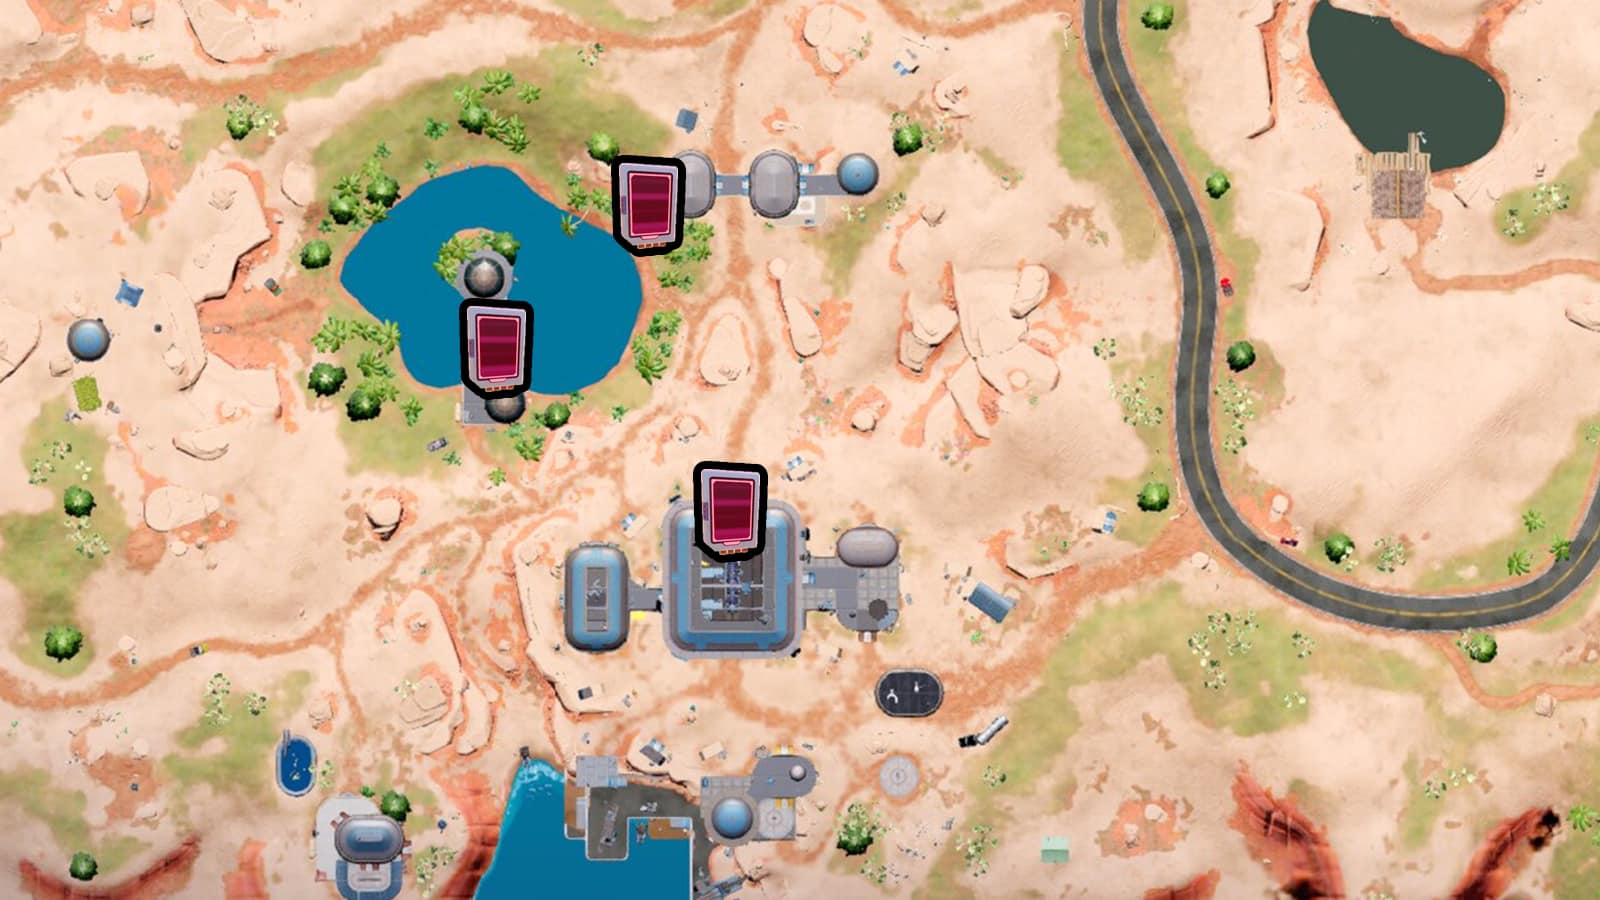 Omni Chip locations at Synapse Station in Fortnite